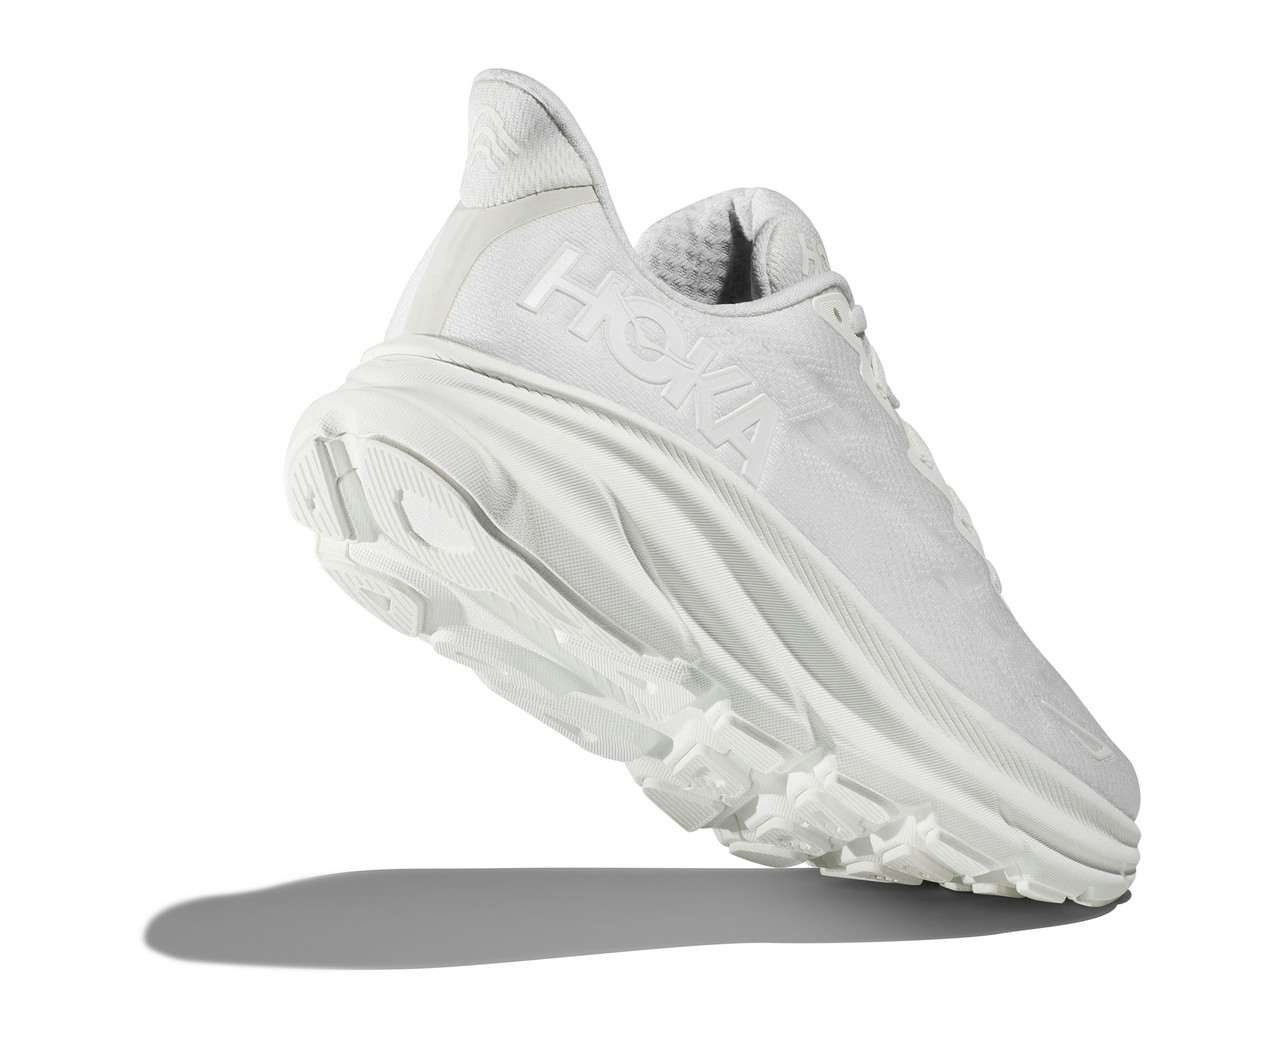 Clifton 9 Road Running Shoes White/White